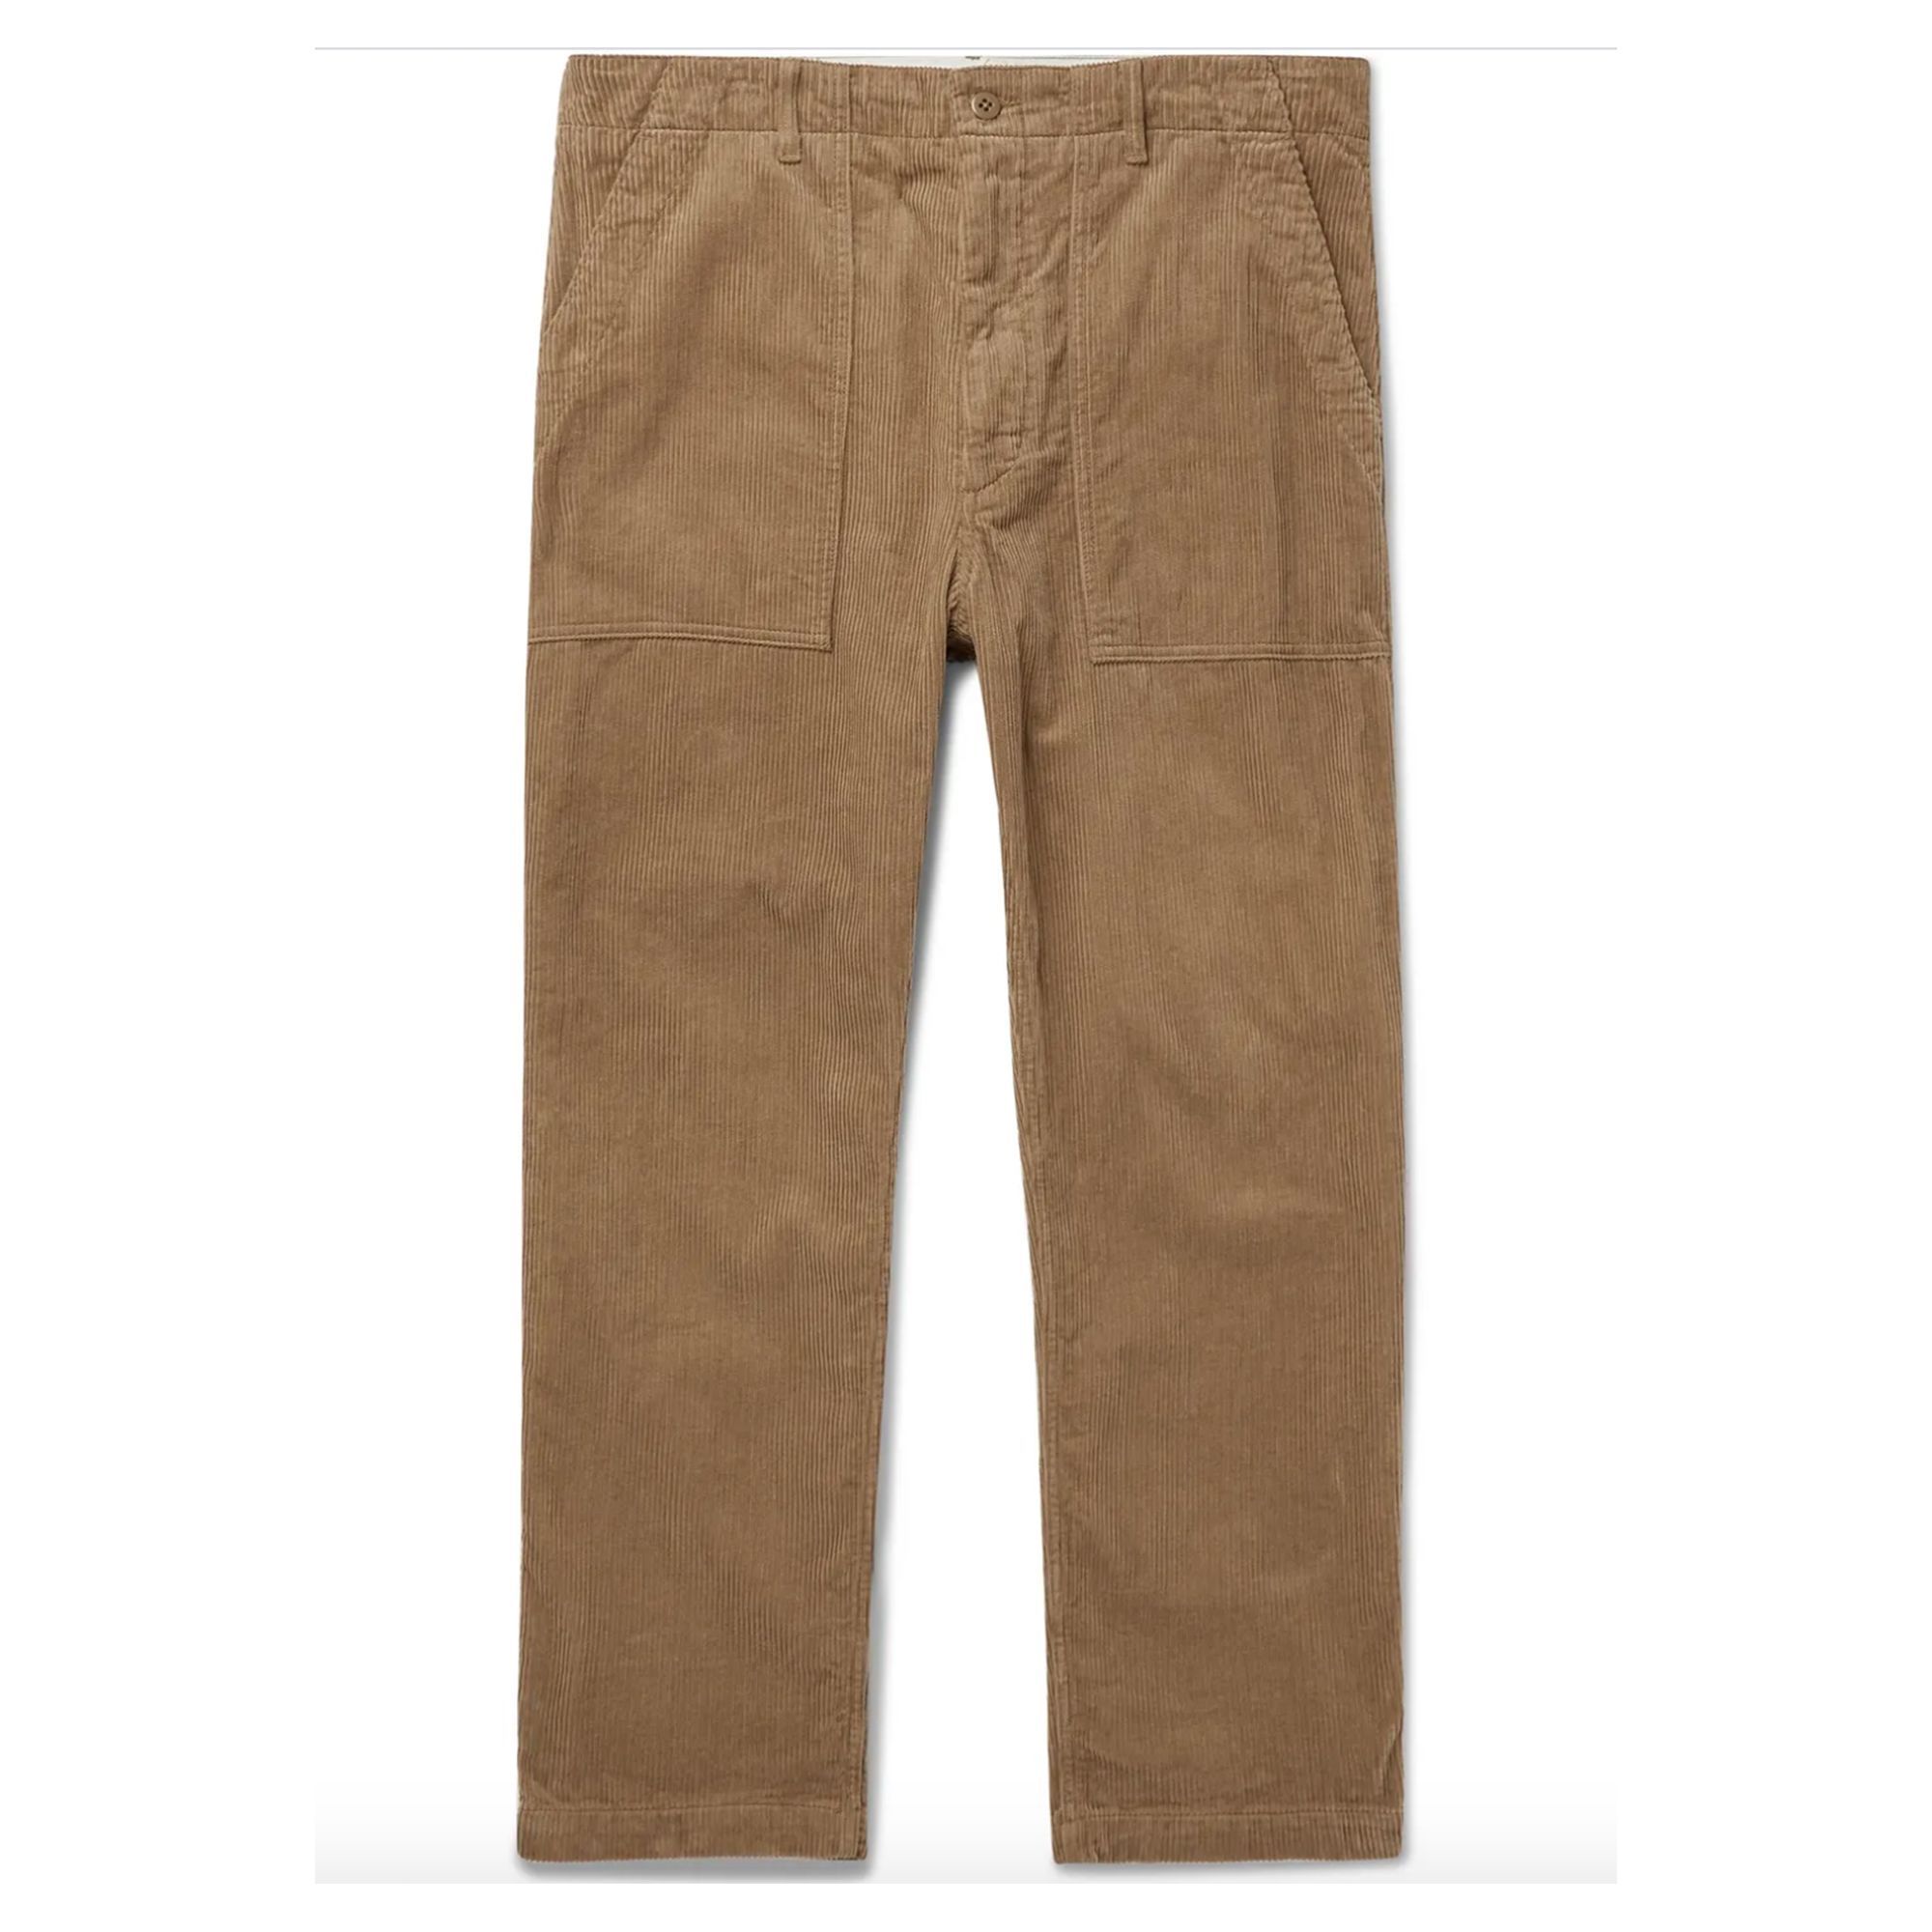 Sweatwater Mens Winter Trousers High Waisted Slim Corduroy Thicken Pants